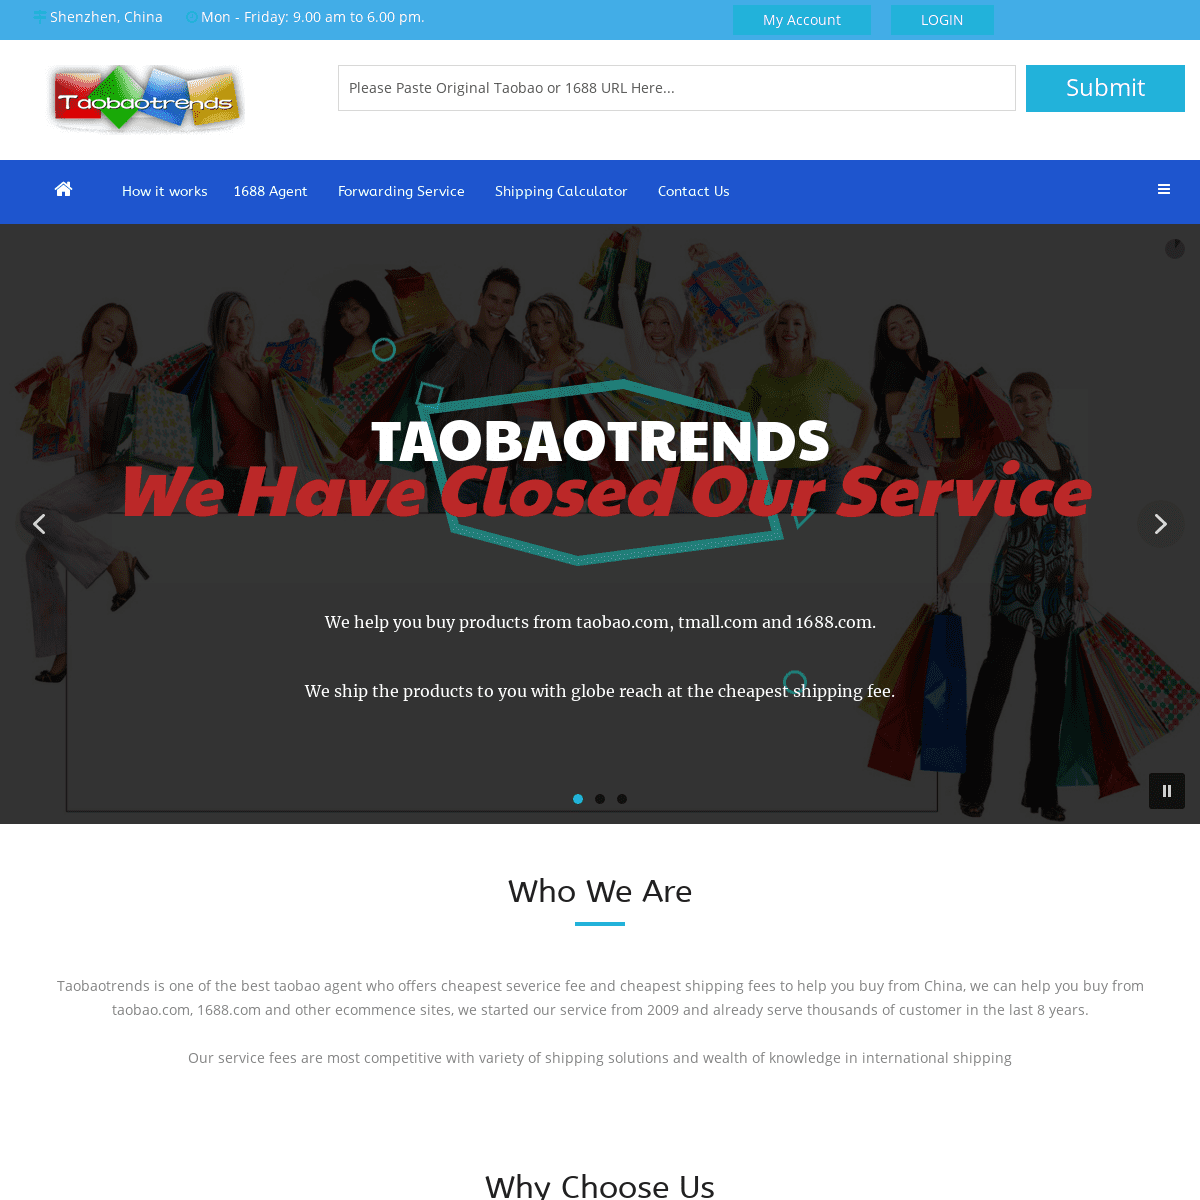 A complete backup of https://taobaotrends.com